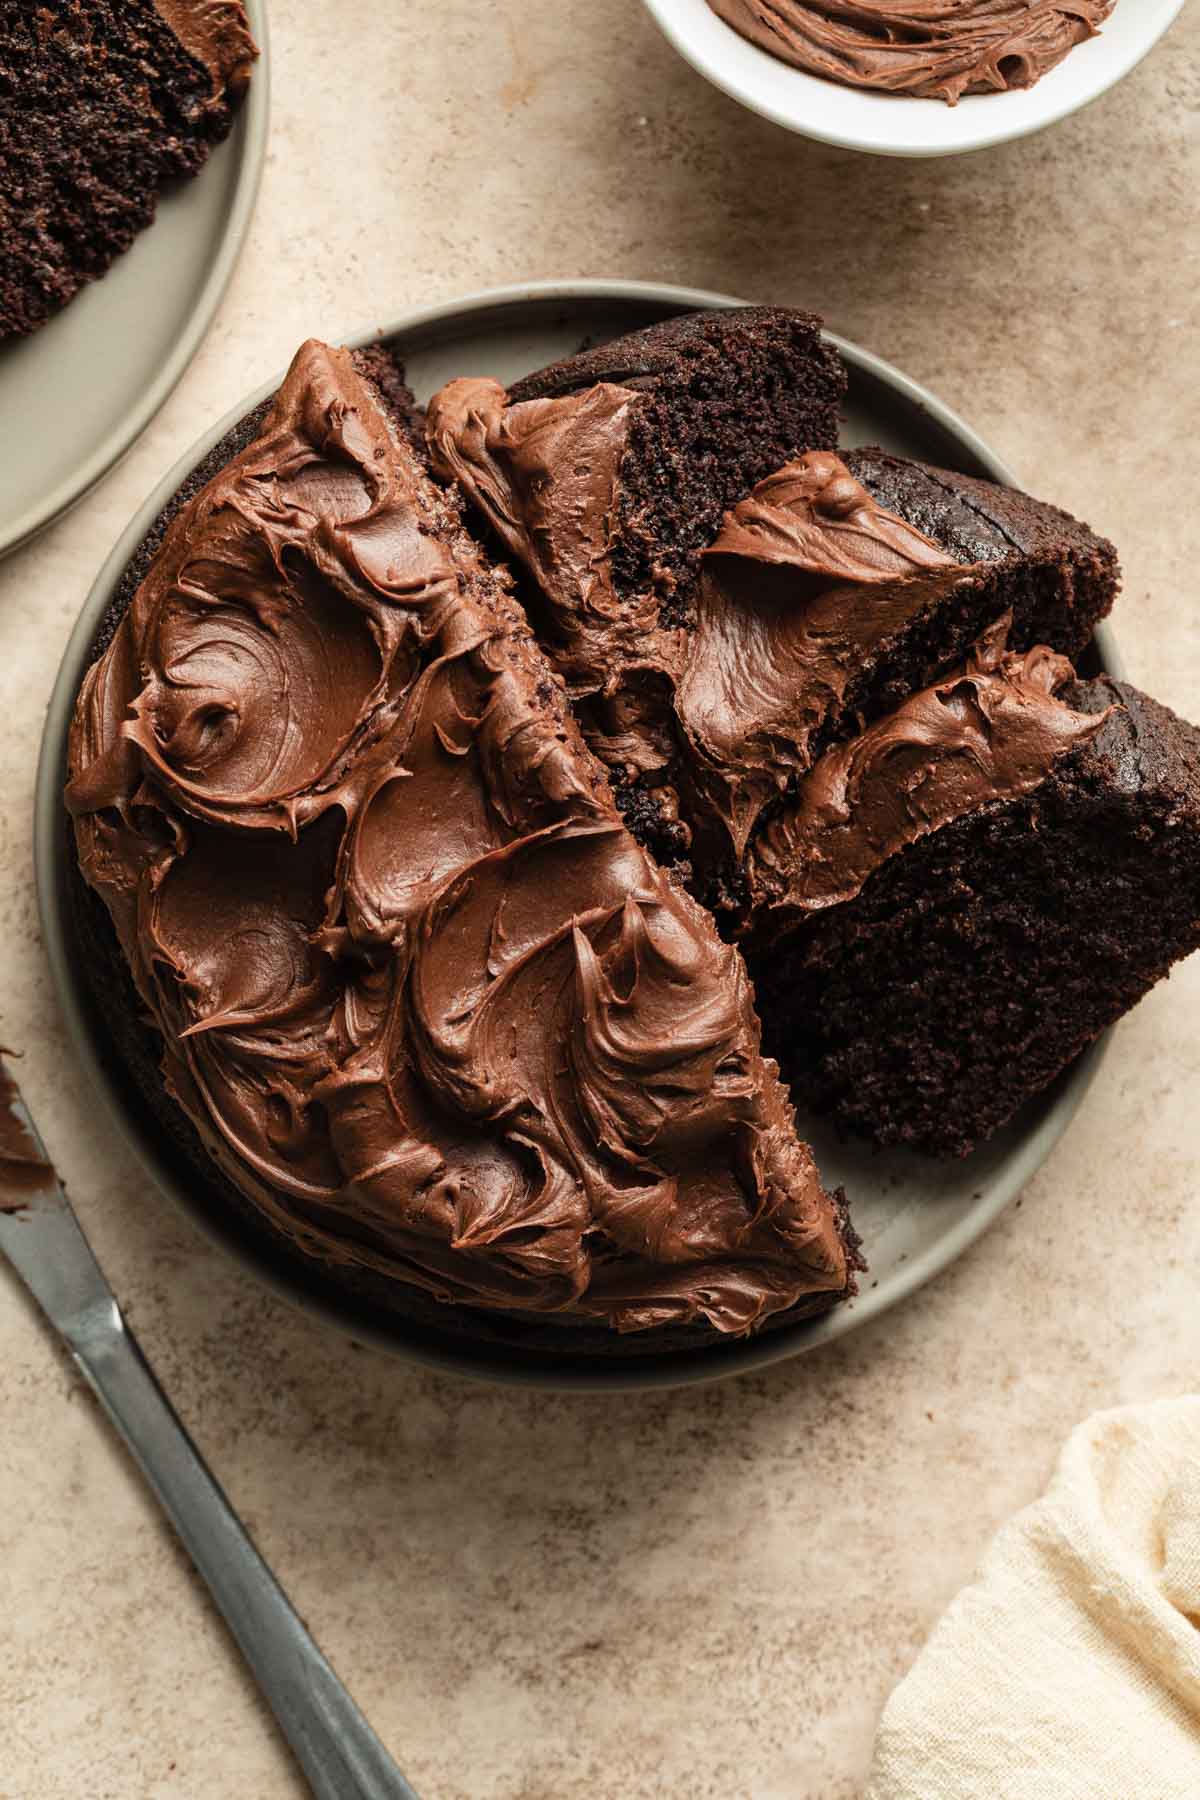 Overhead view of chocolate cake on a serving plate with half of the cake sliced into pieces.